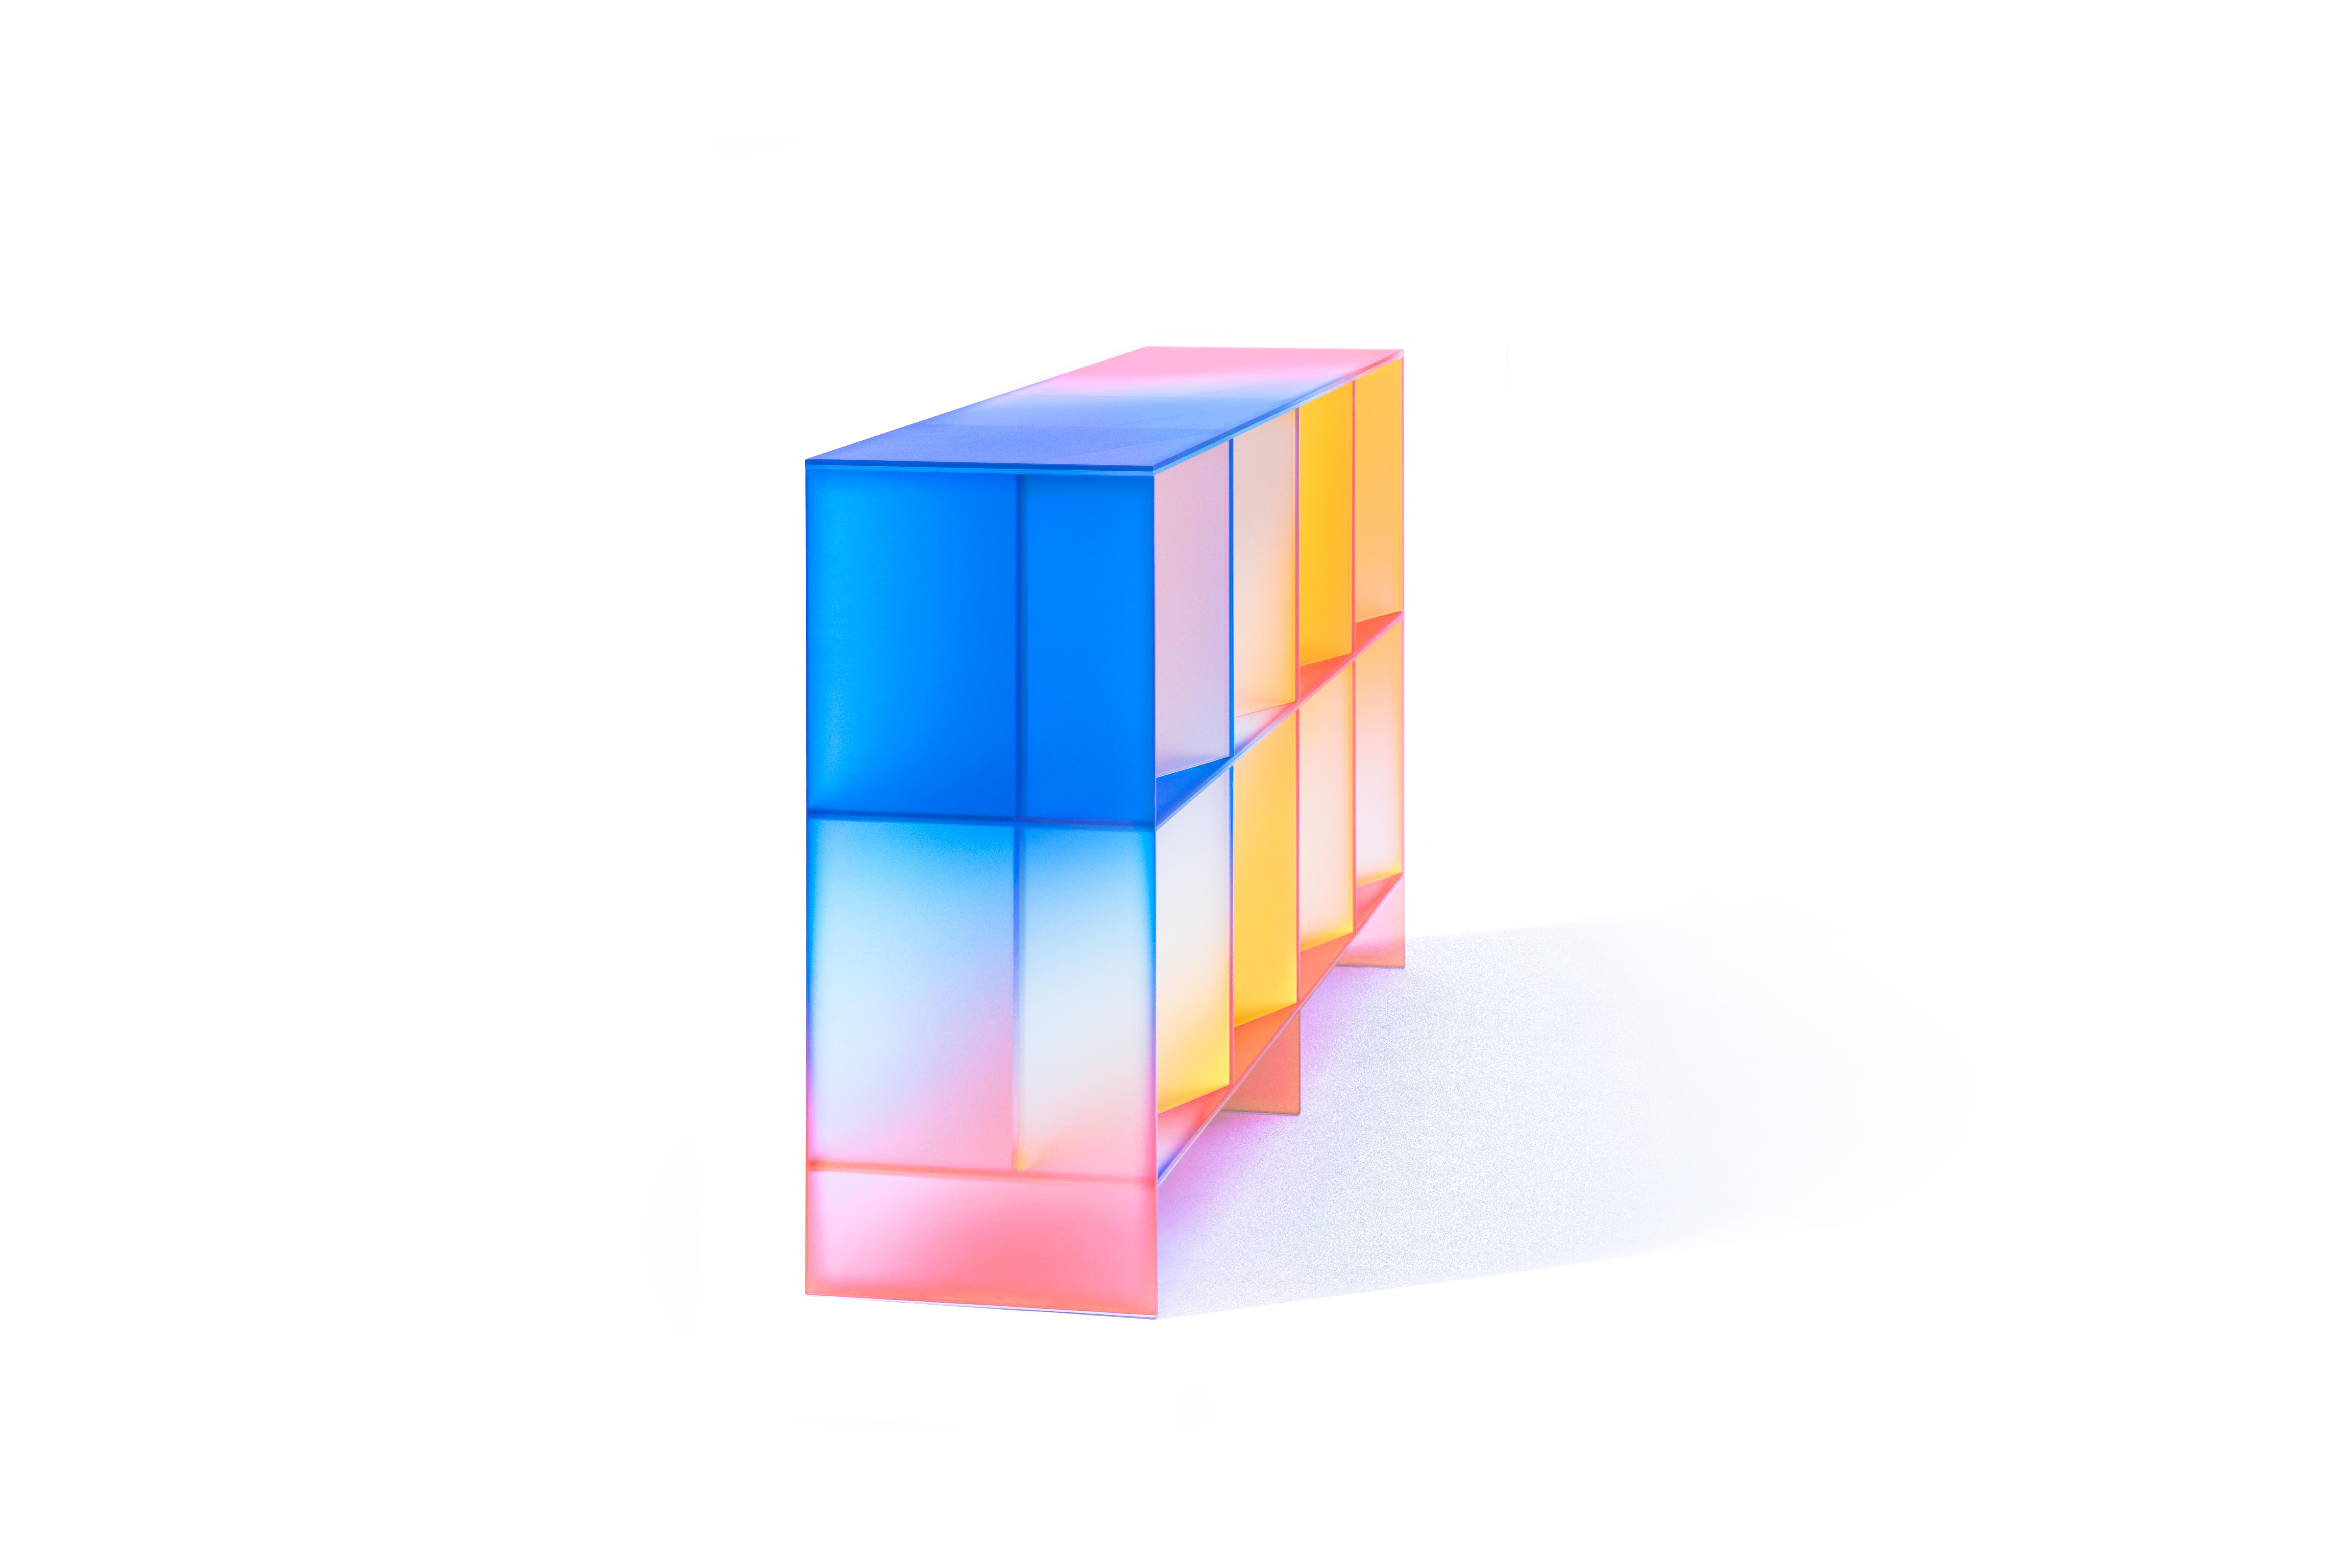 'HALO' collection by Buzao - Cabinet
Laminated dichroic glass, gradient colors 
Measures: 166 x 40 x H 98 cm

Studio Buzao from Guangzhou (China) is exploring innovation with furniture and lighting design. From marble to lava stone, from